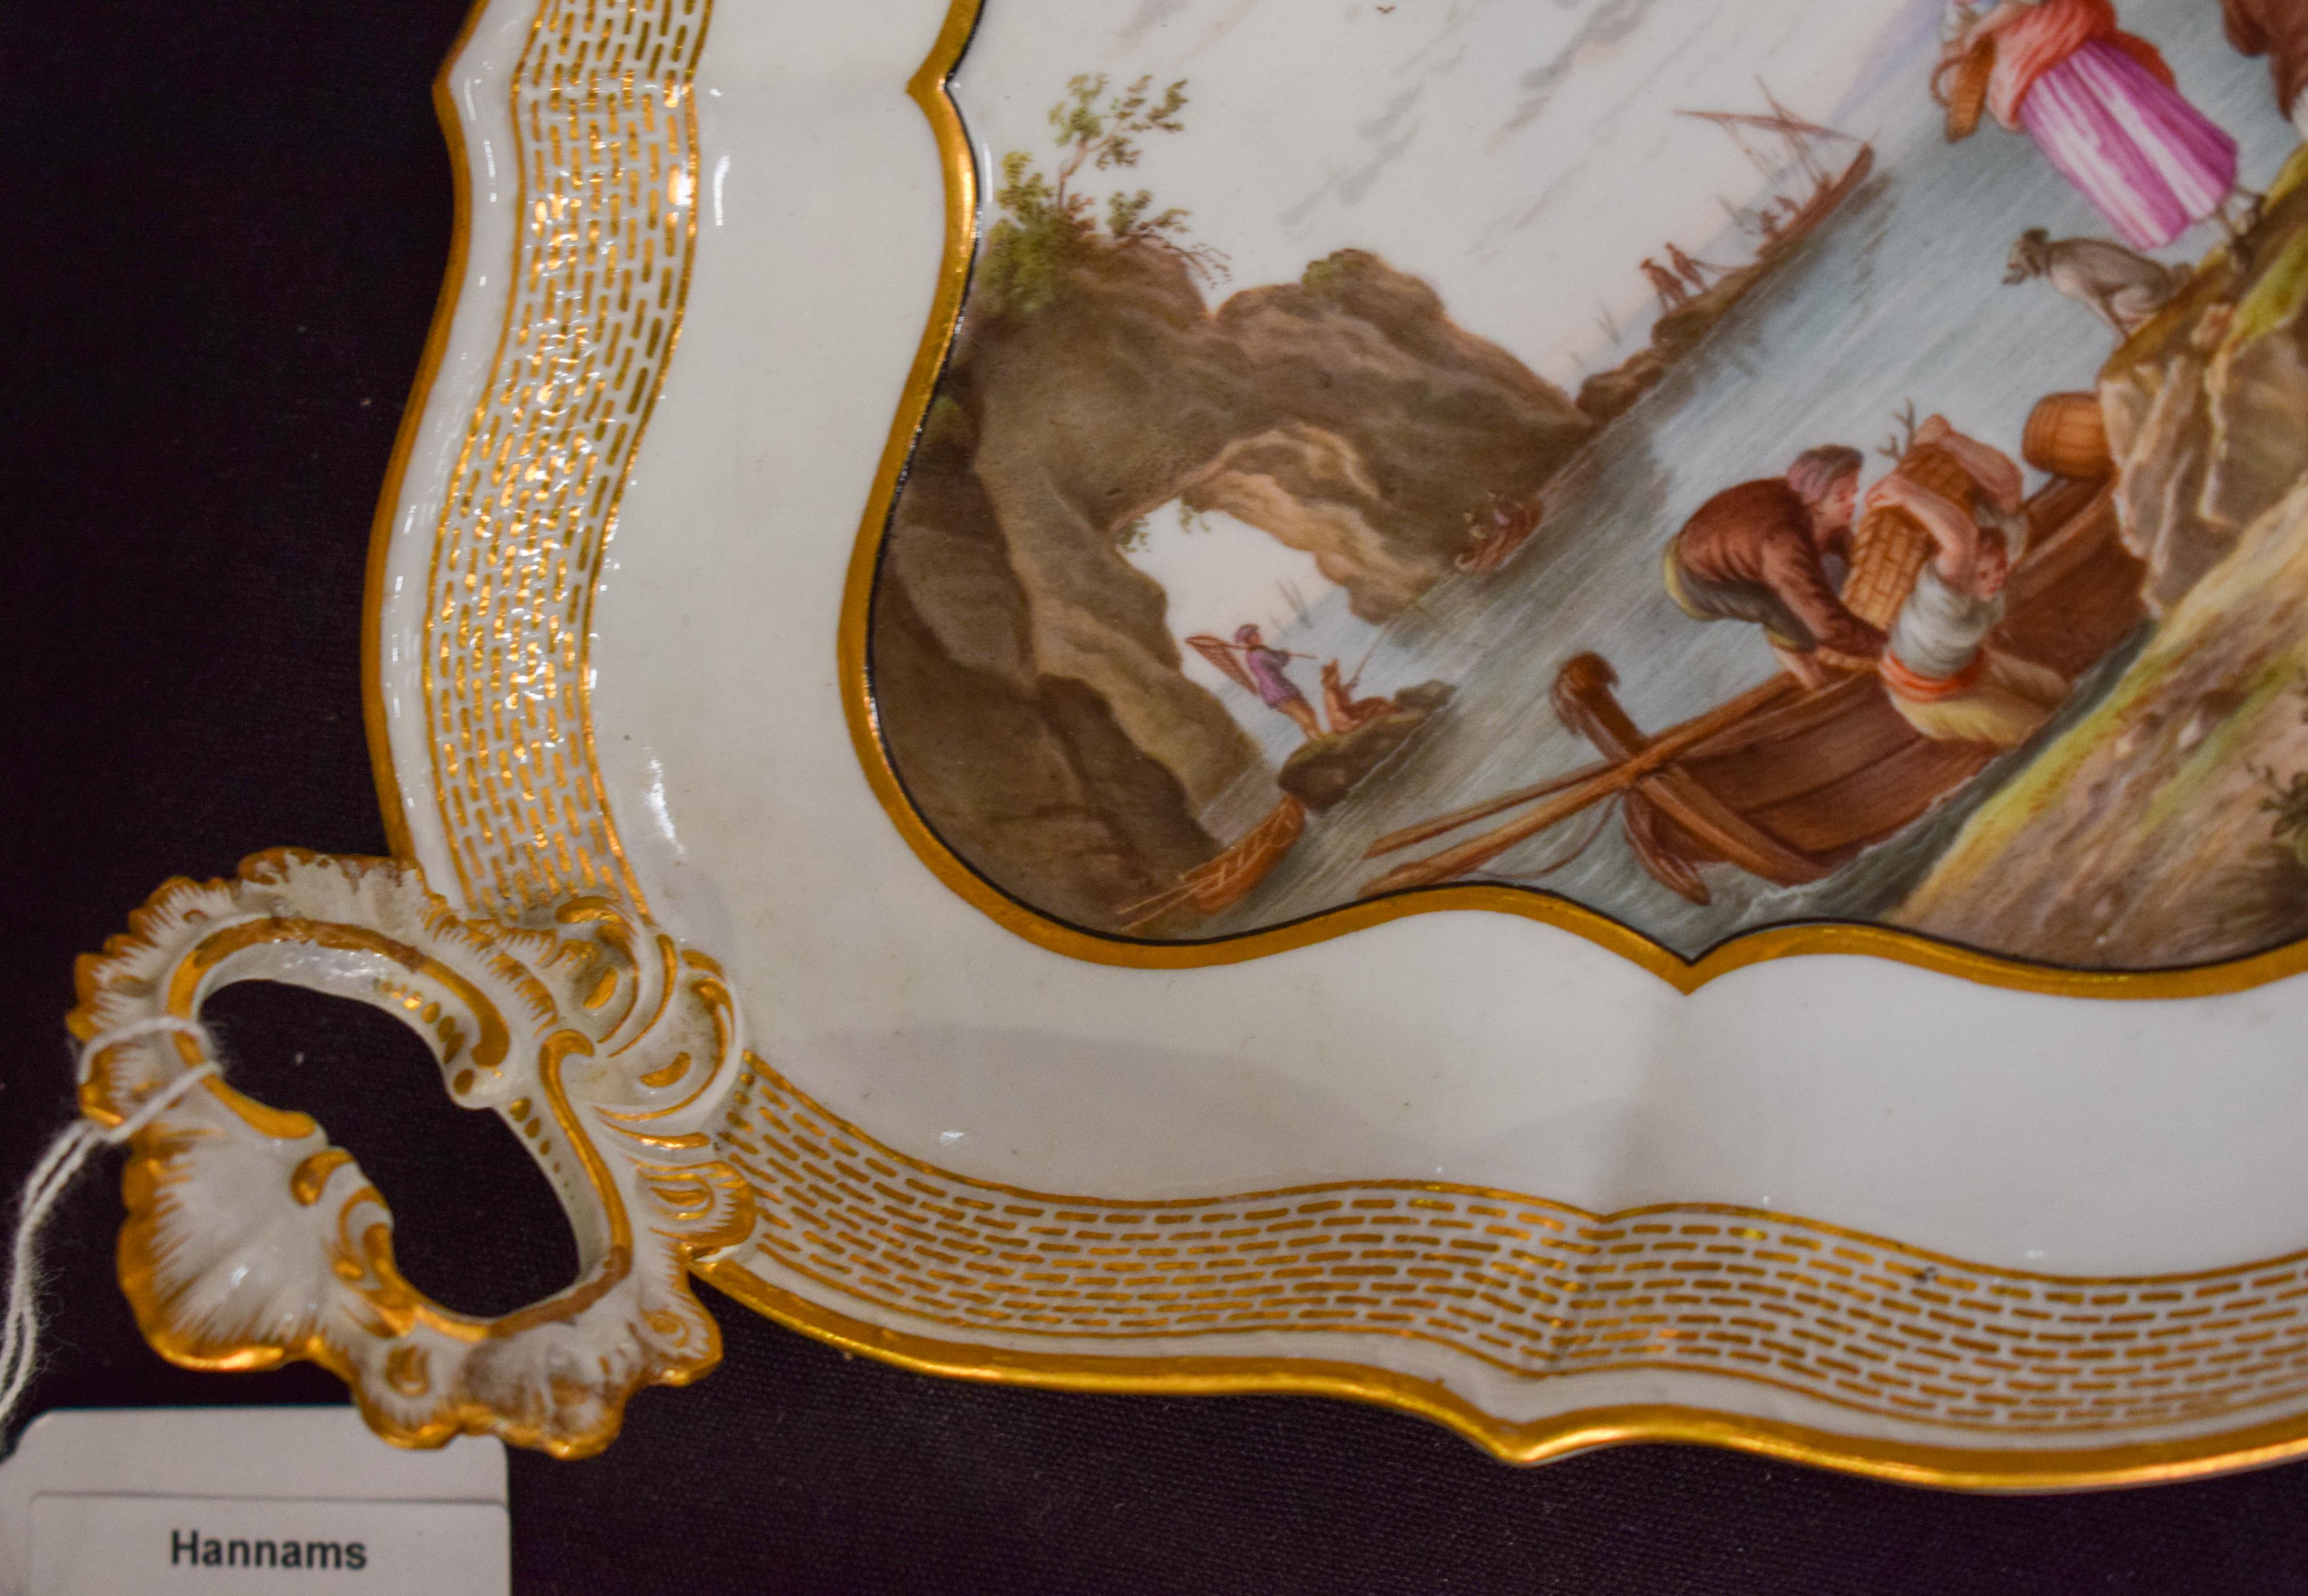 A FINE PAIR OF 18TH/19TH CENTURY MEISSEN TWIN HANDLED PORCELAIN DISHES painted with coastal views. 2 - Image 8 of 19